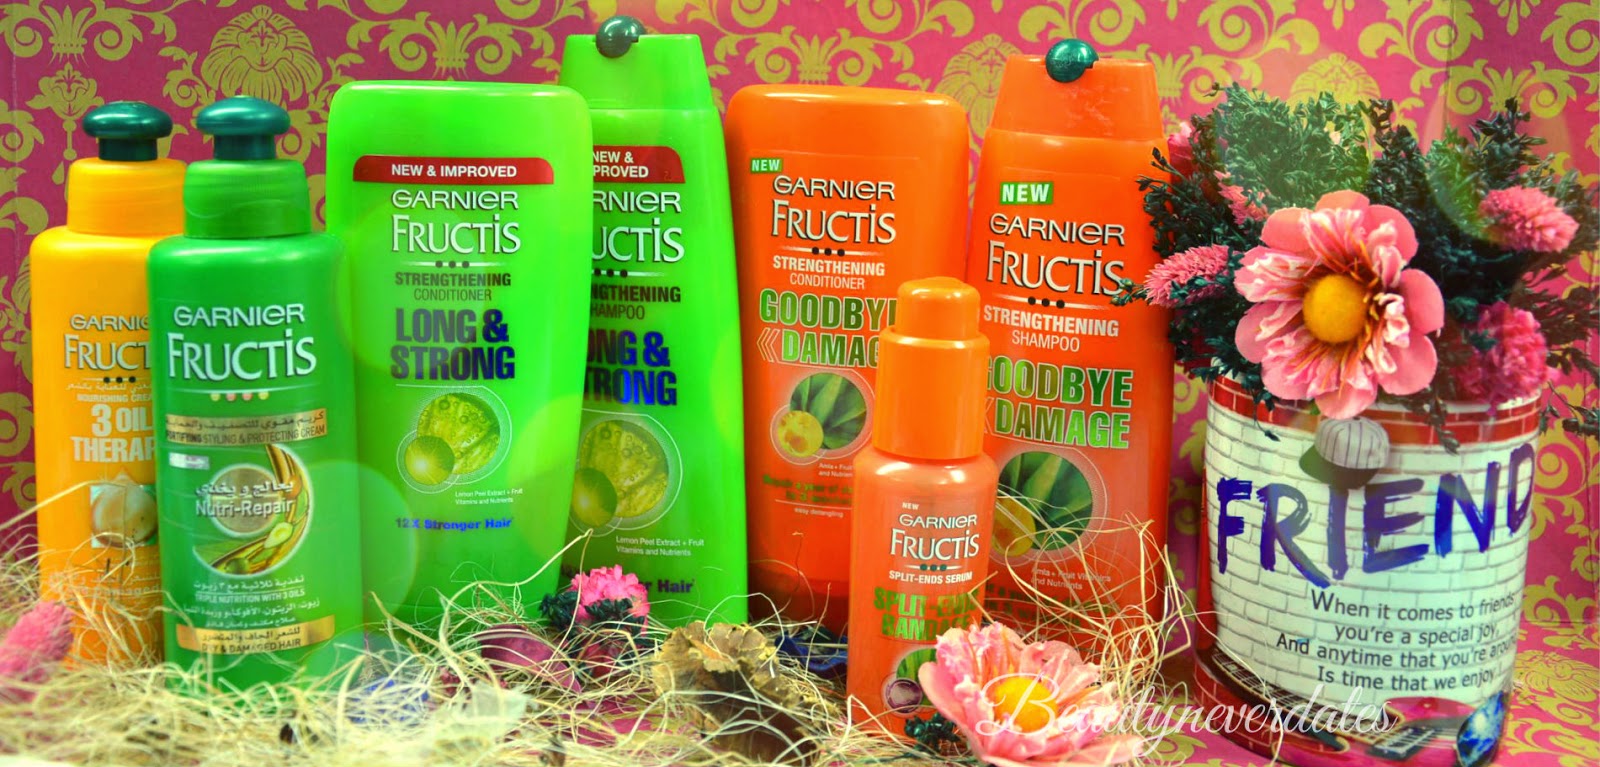 My Favorite Garnier Hair Products - Shampoo, Conditioner, Leave-in-conditioner and Styling Gel